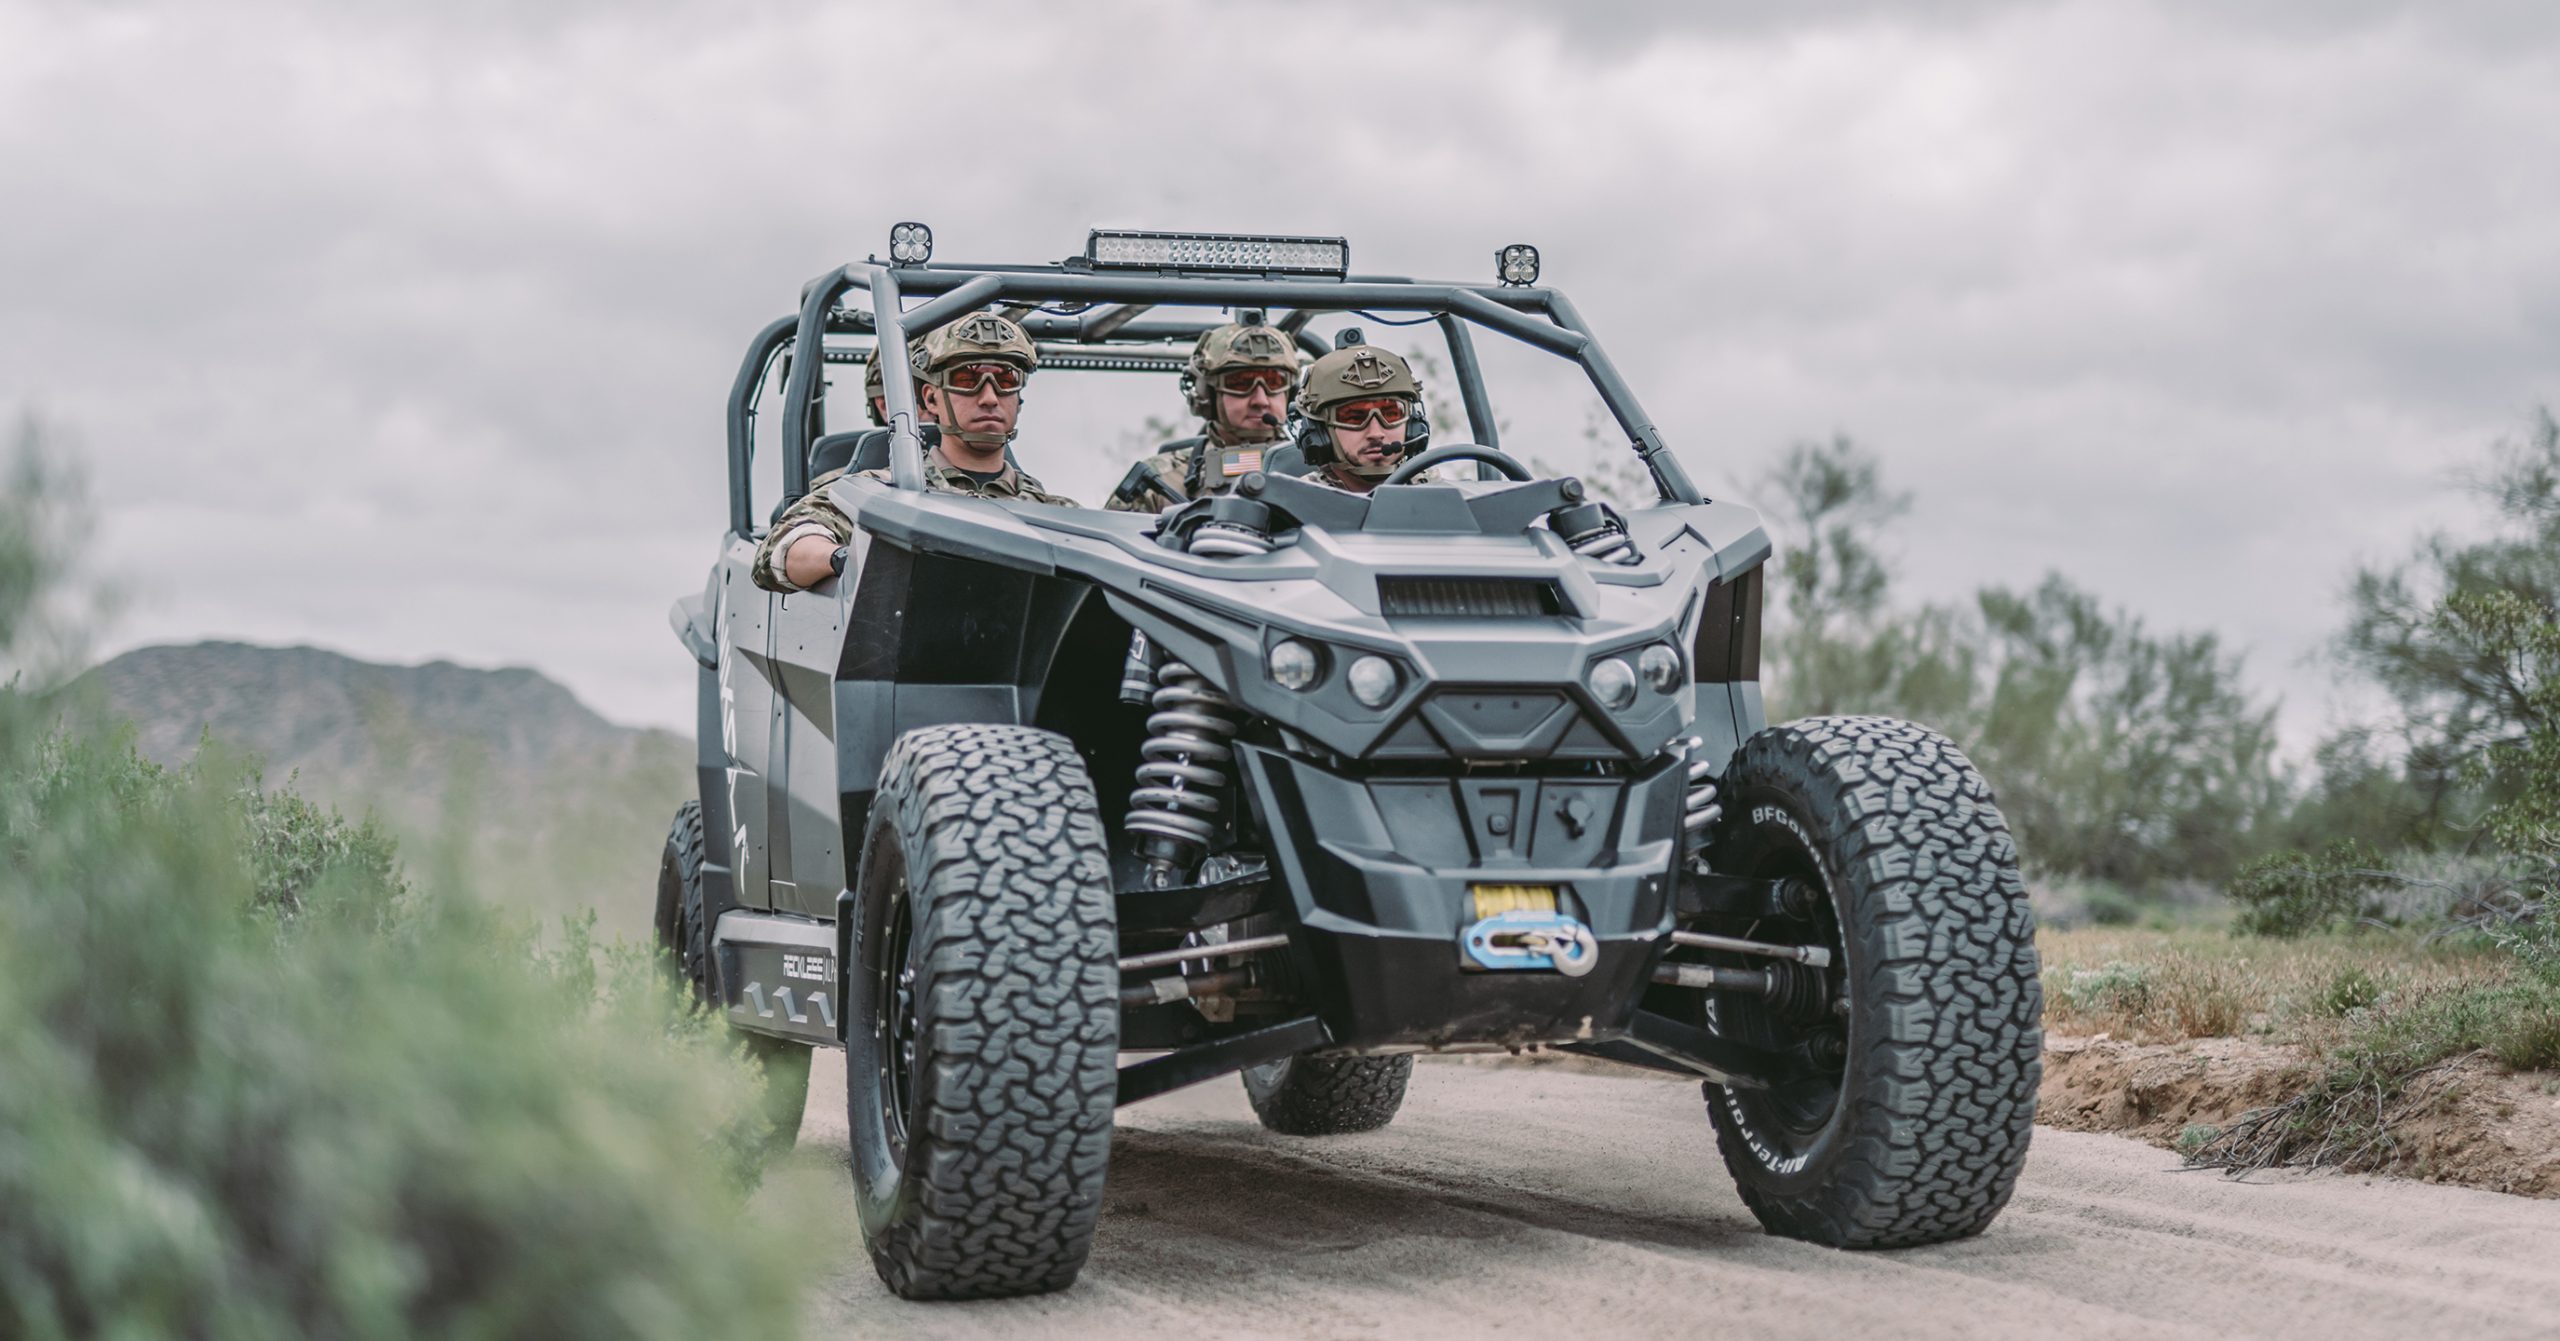 A Nikola Reckless is loaded up with soldiers and heading down a dirt road.